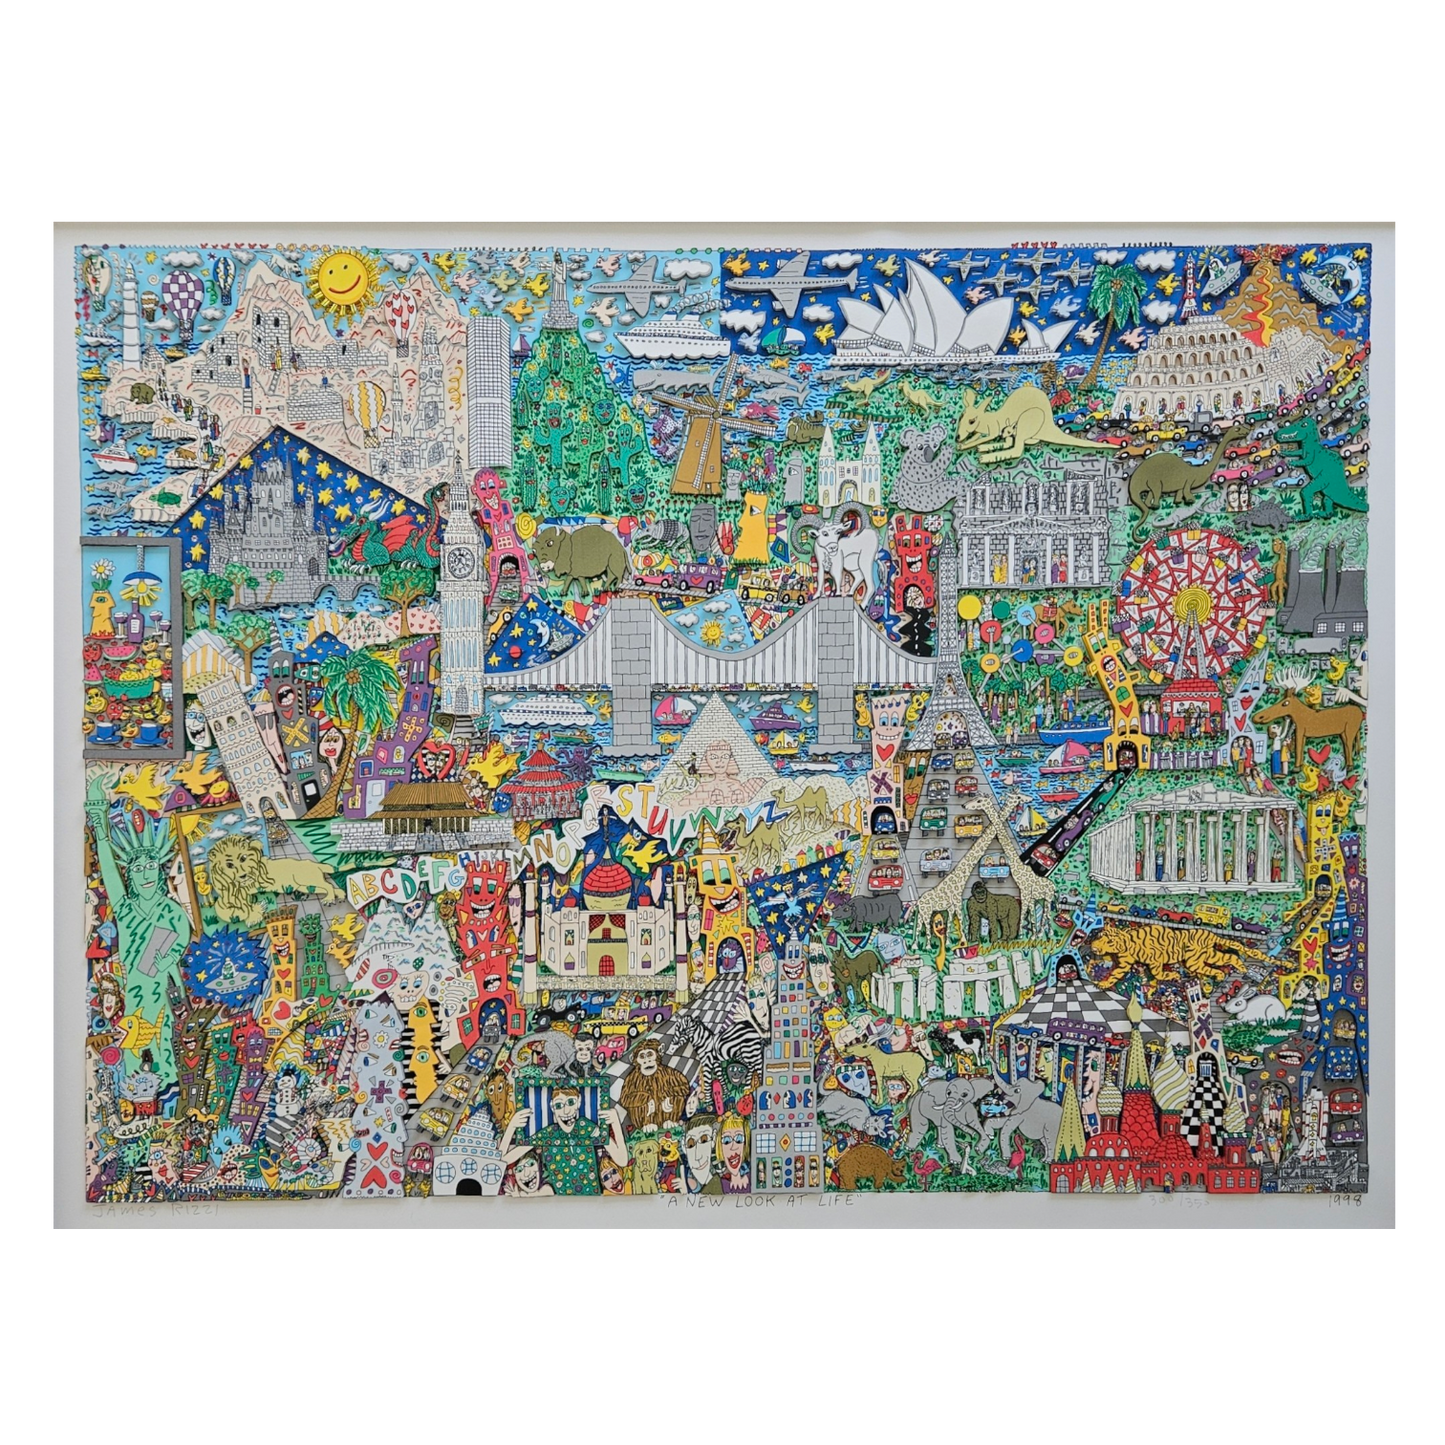 James Rizzi - A New Look at Life (1998)